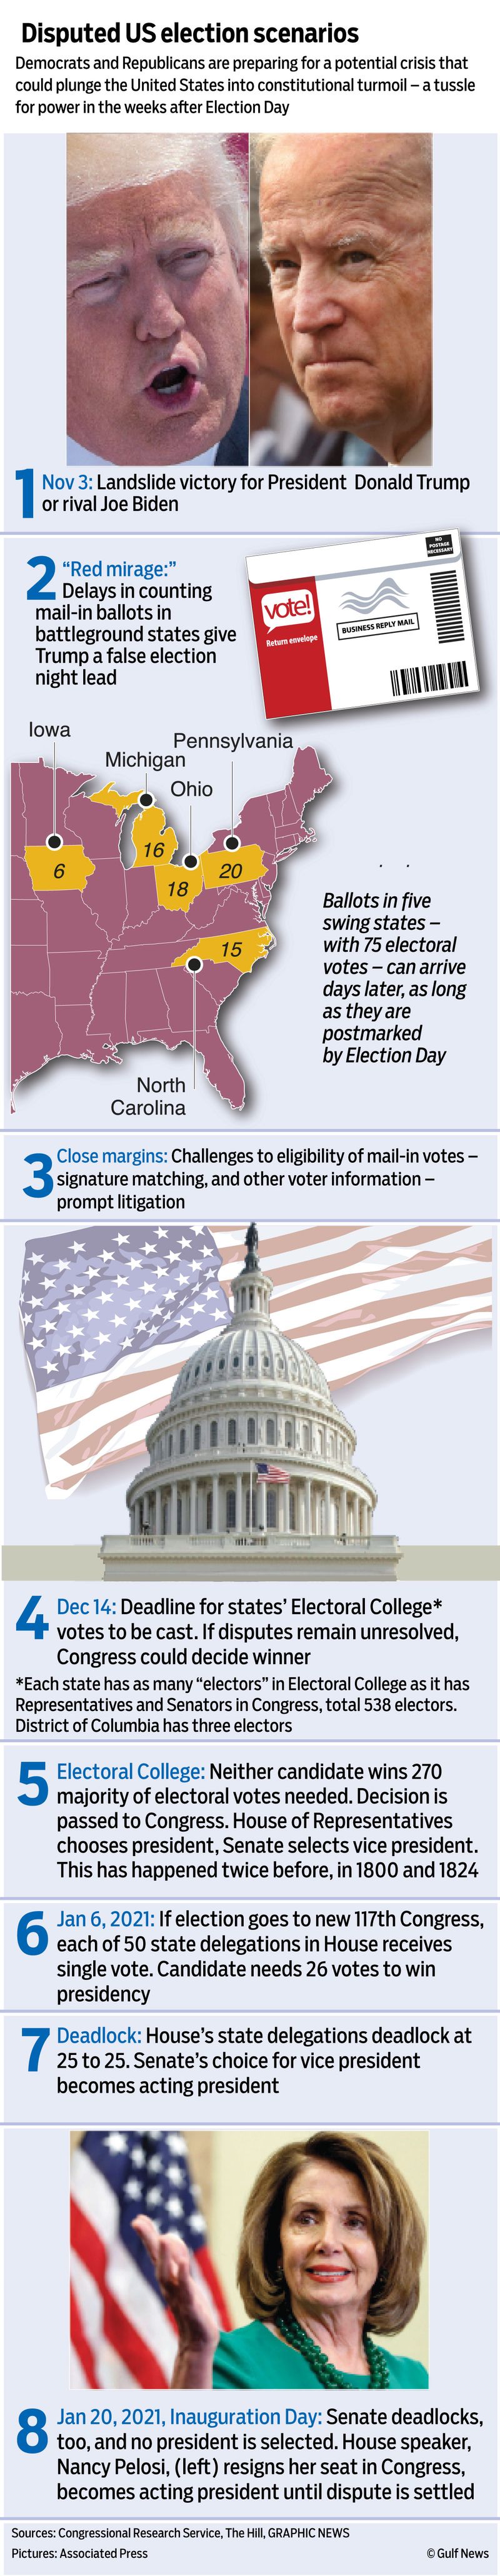 Disputed election US graphic